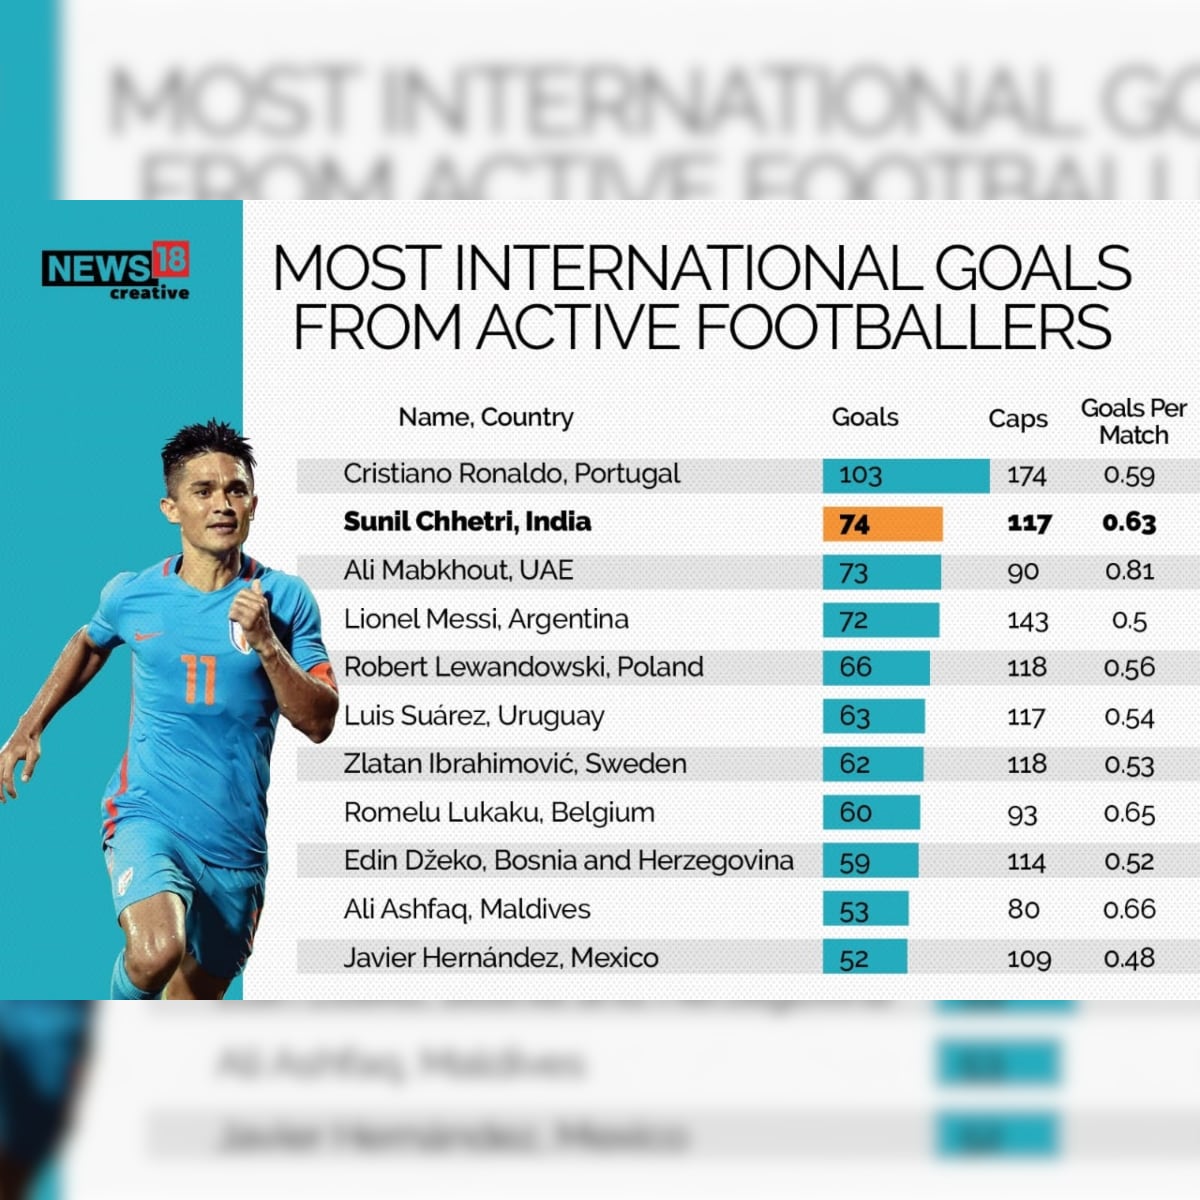 Top with Most International Goals